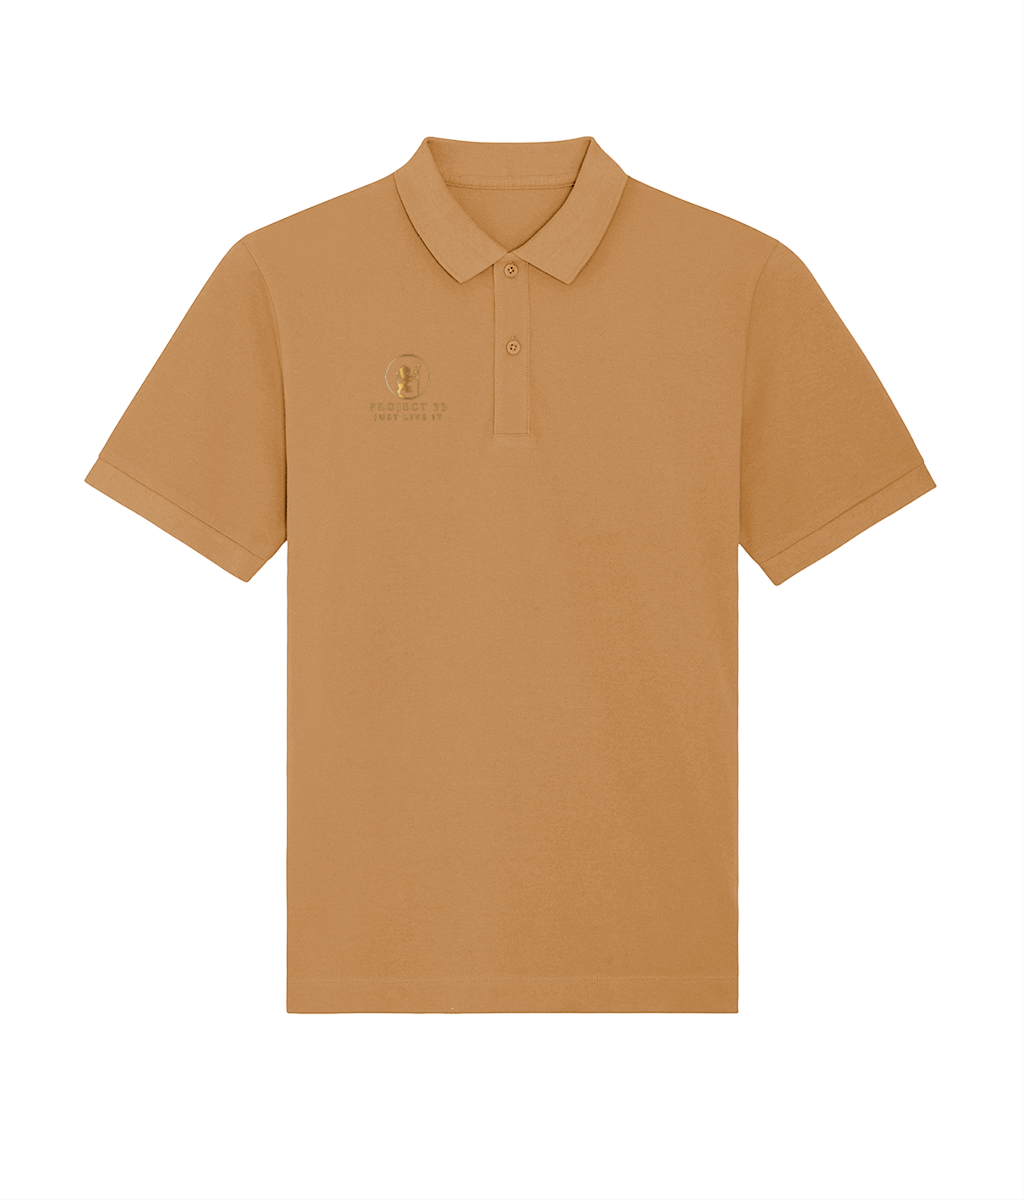 project 33 Polo shirt